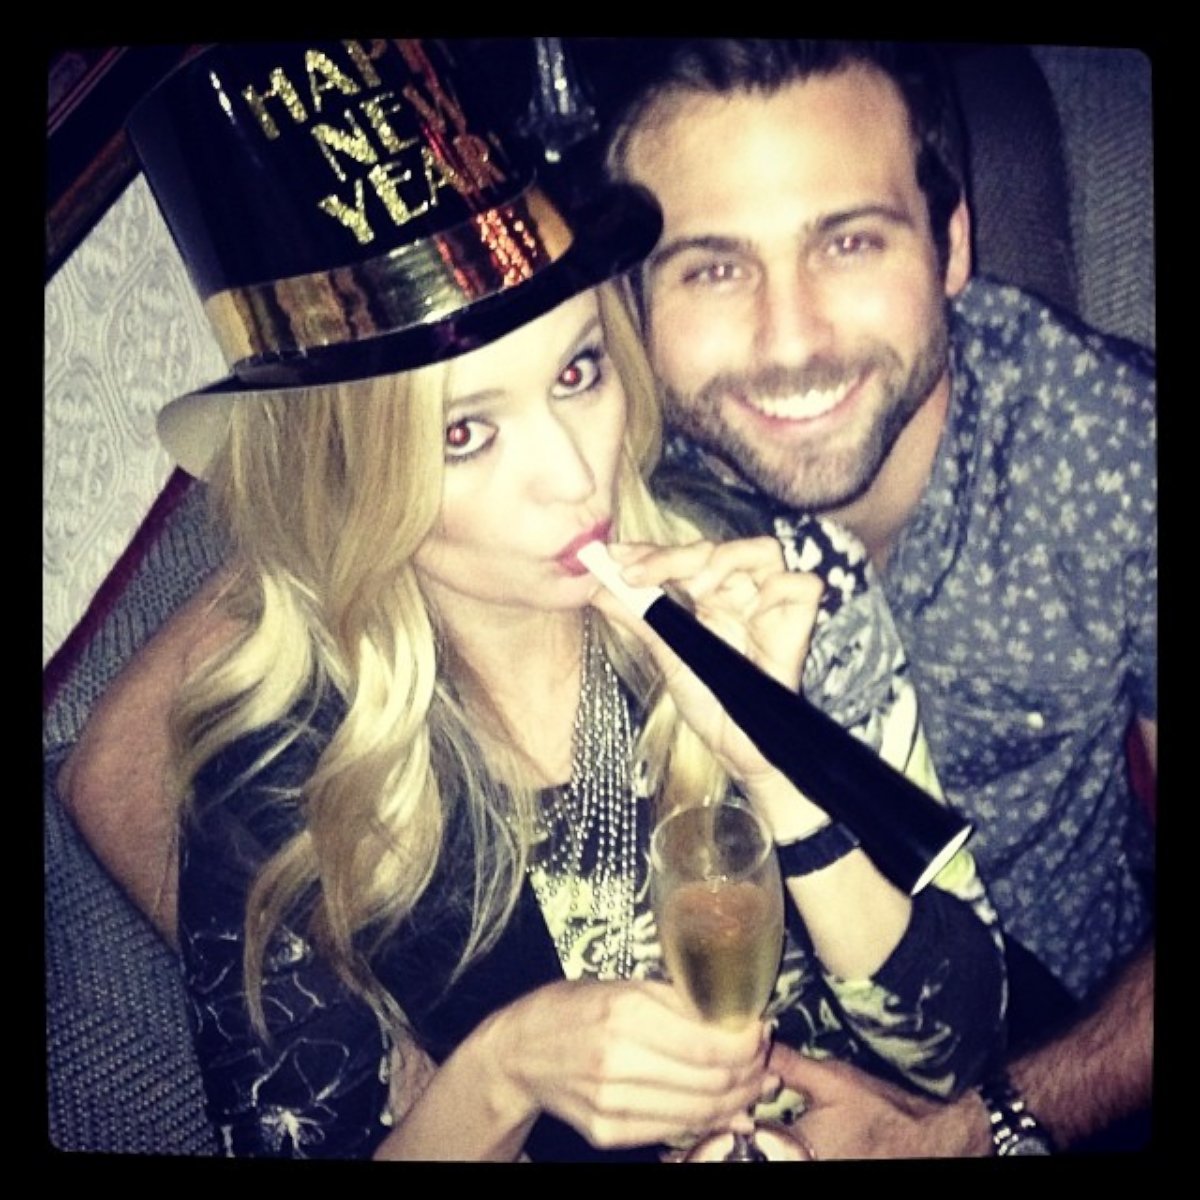 PHOTO:Emily Maynard posted this Instagram photo with this caption "it's going to be a good year :", Jan. 1, 2014.